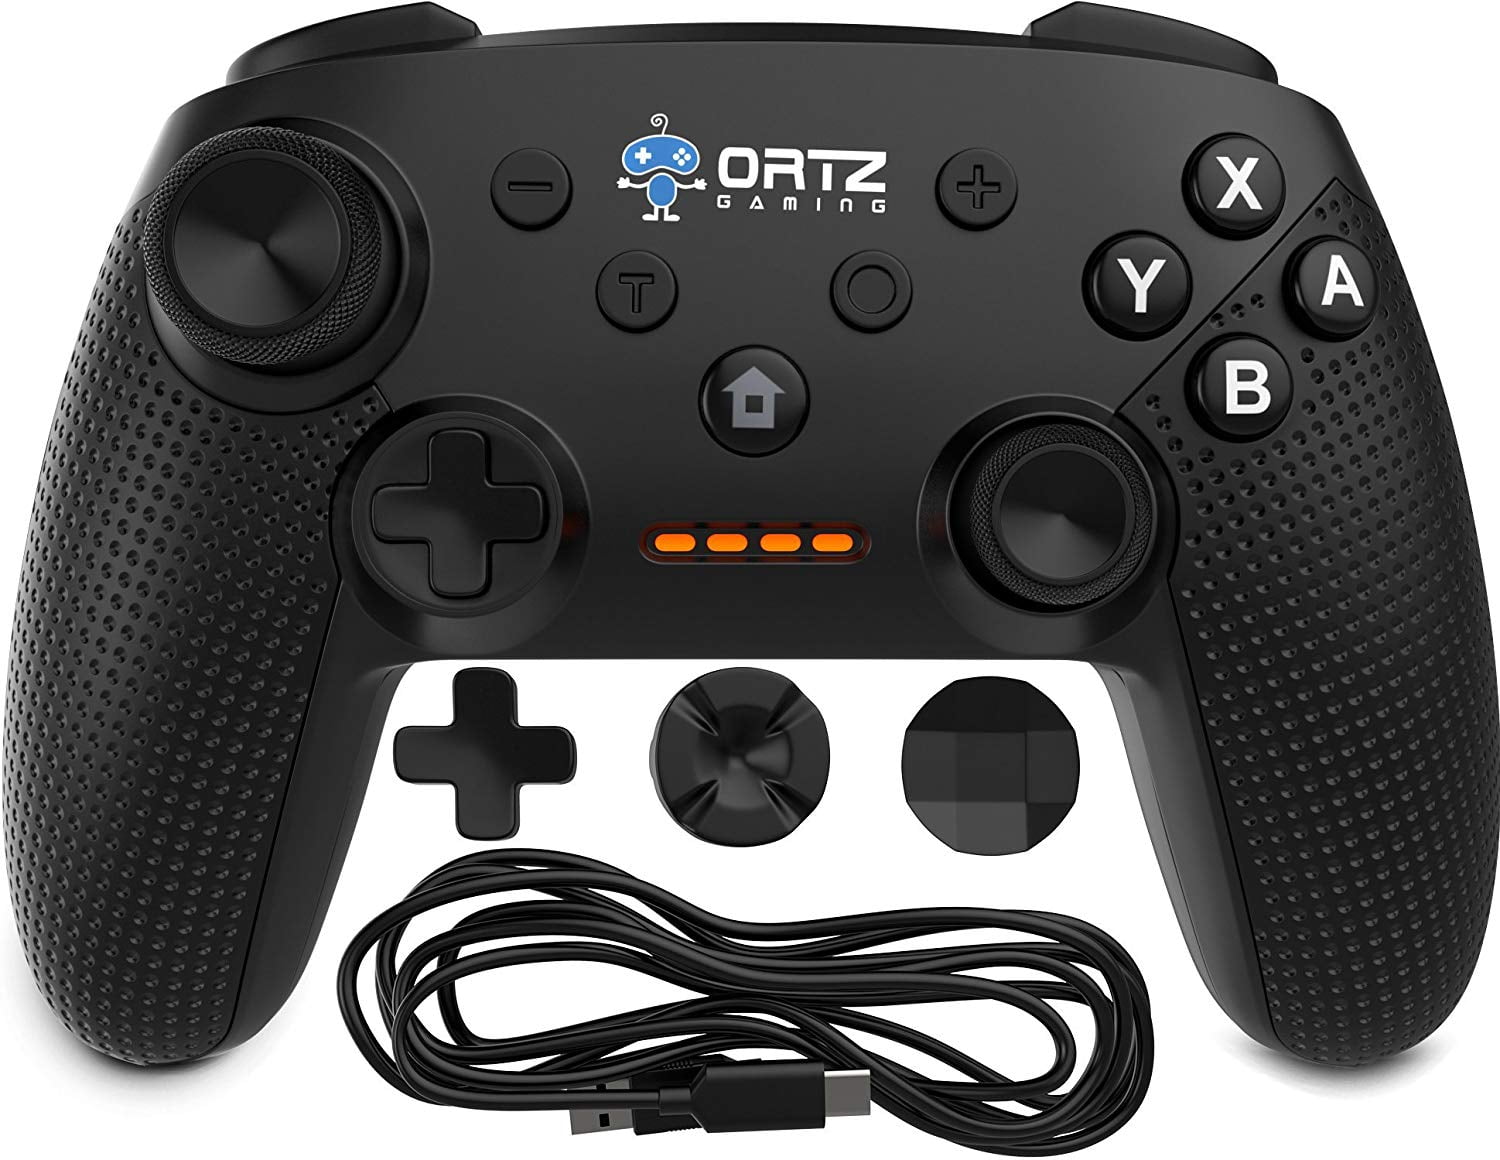 Ortz Wireless Turbo Buttons Nintendo Controller Remote - Best PC USB Comput...